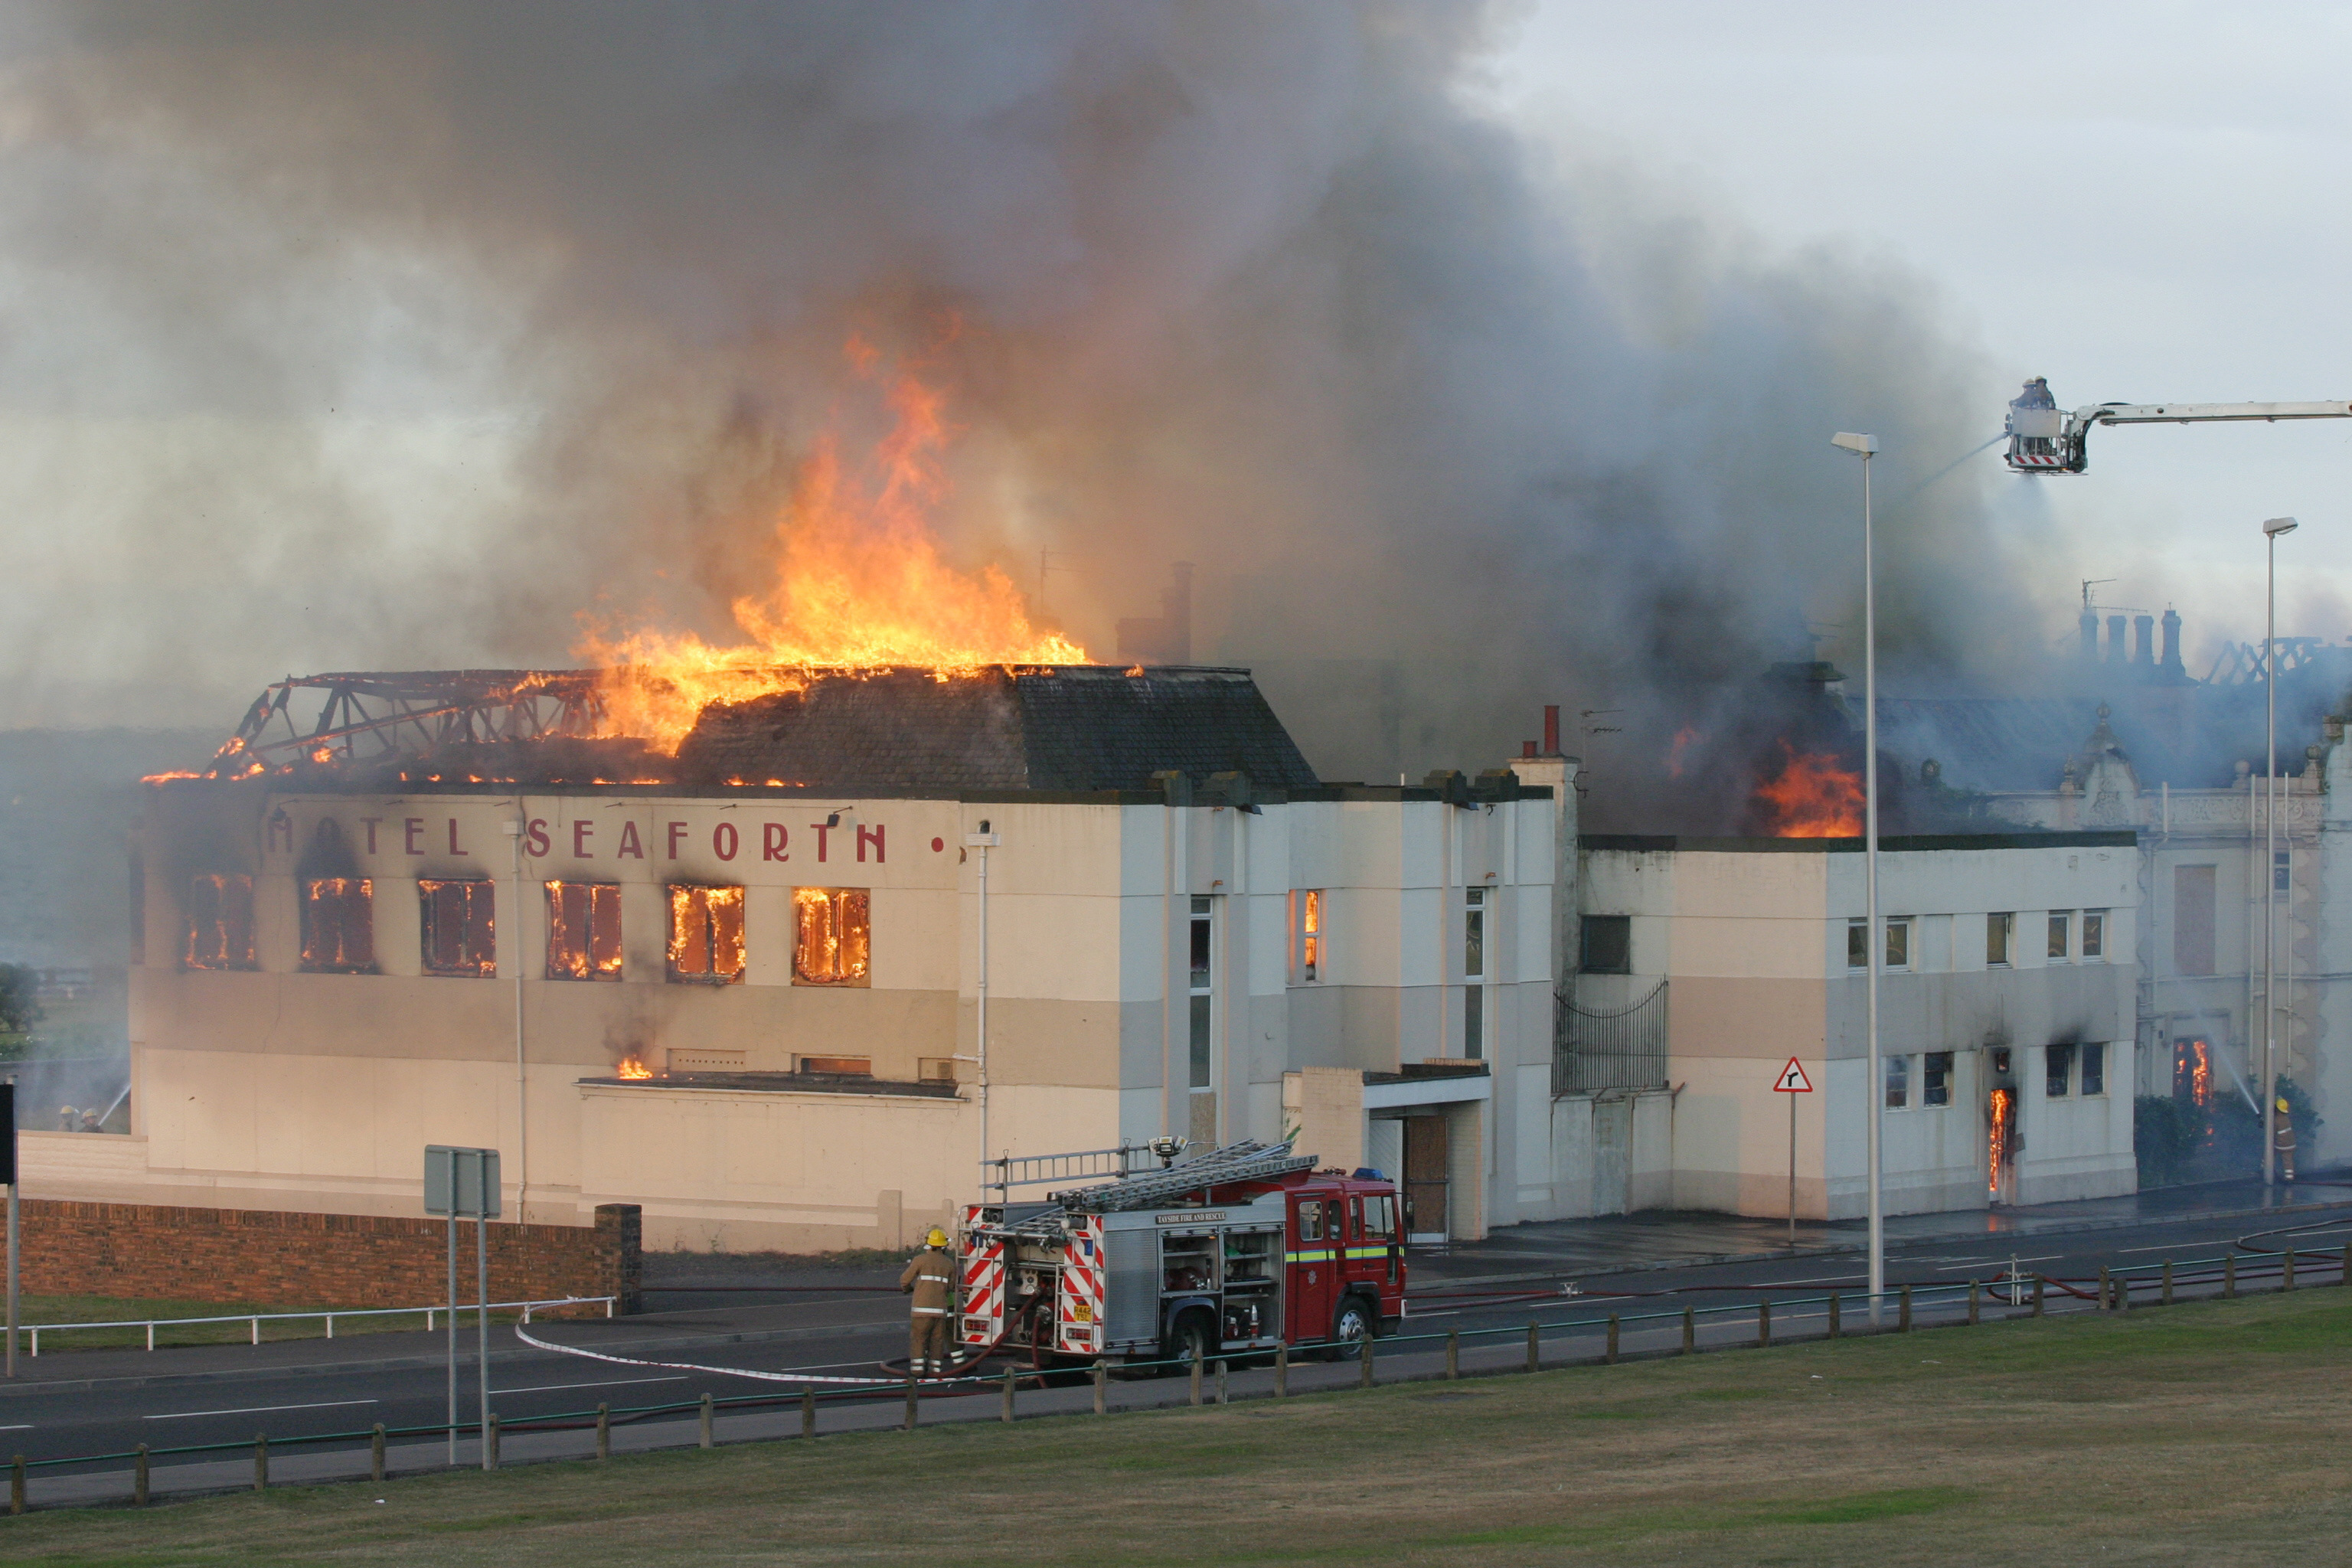 Fire ripped through the Seaforth Hotel in 2006. Image: Supplied